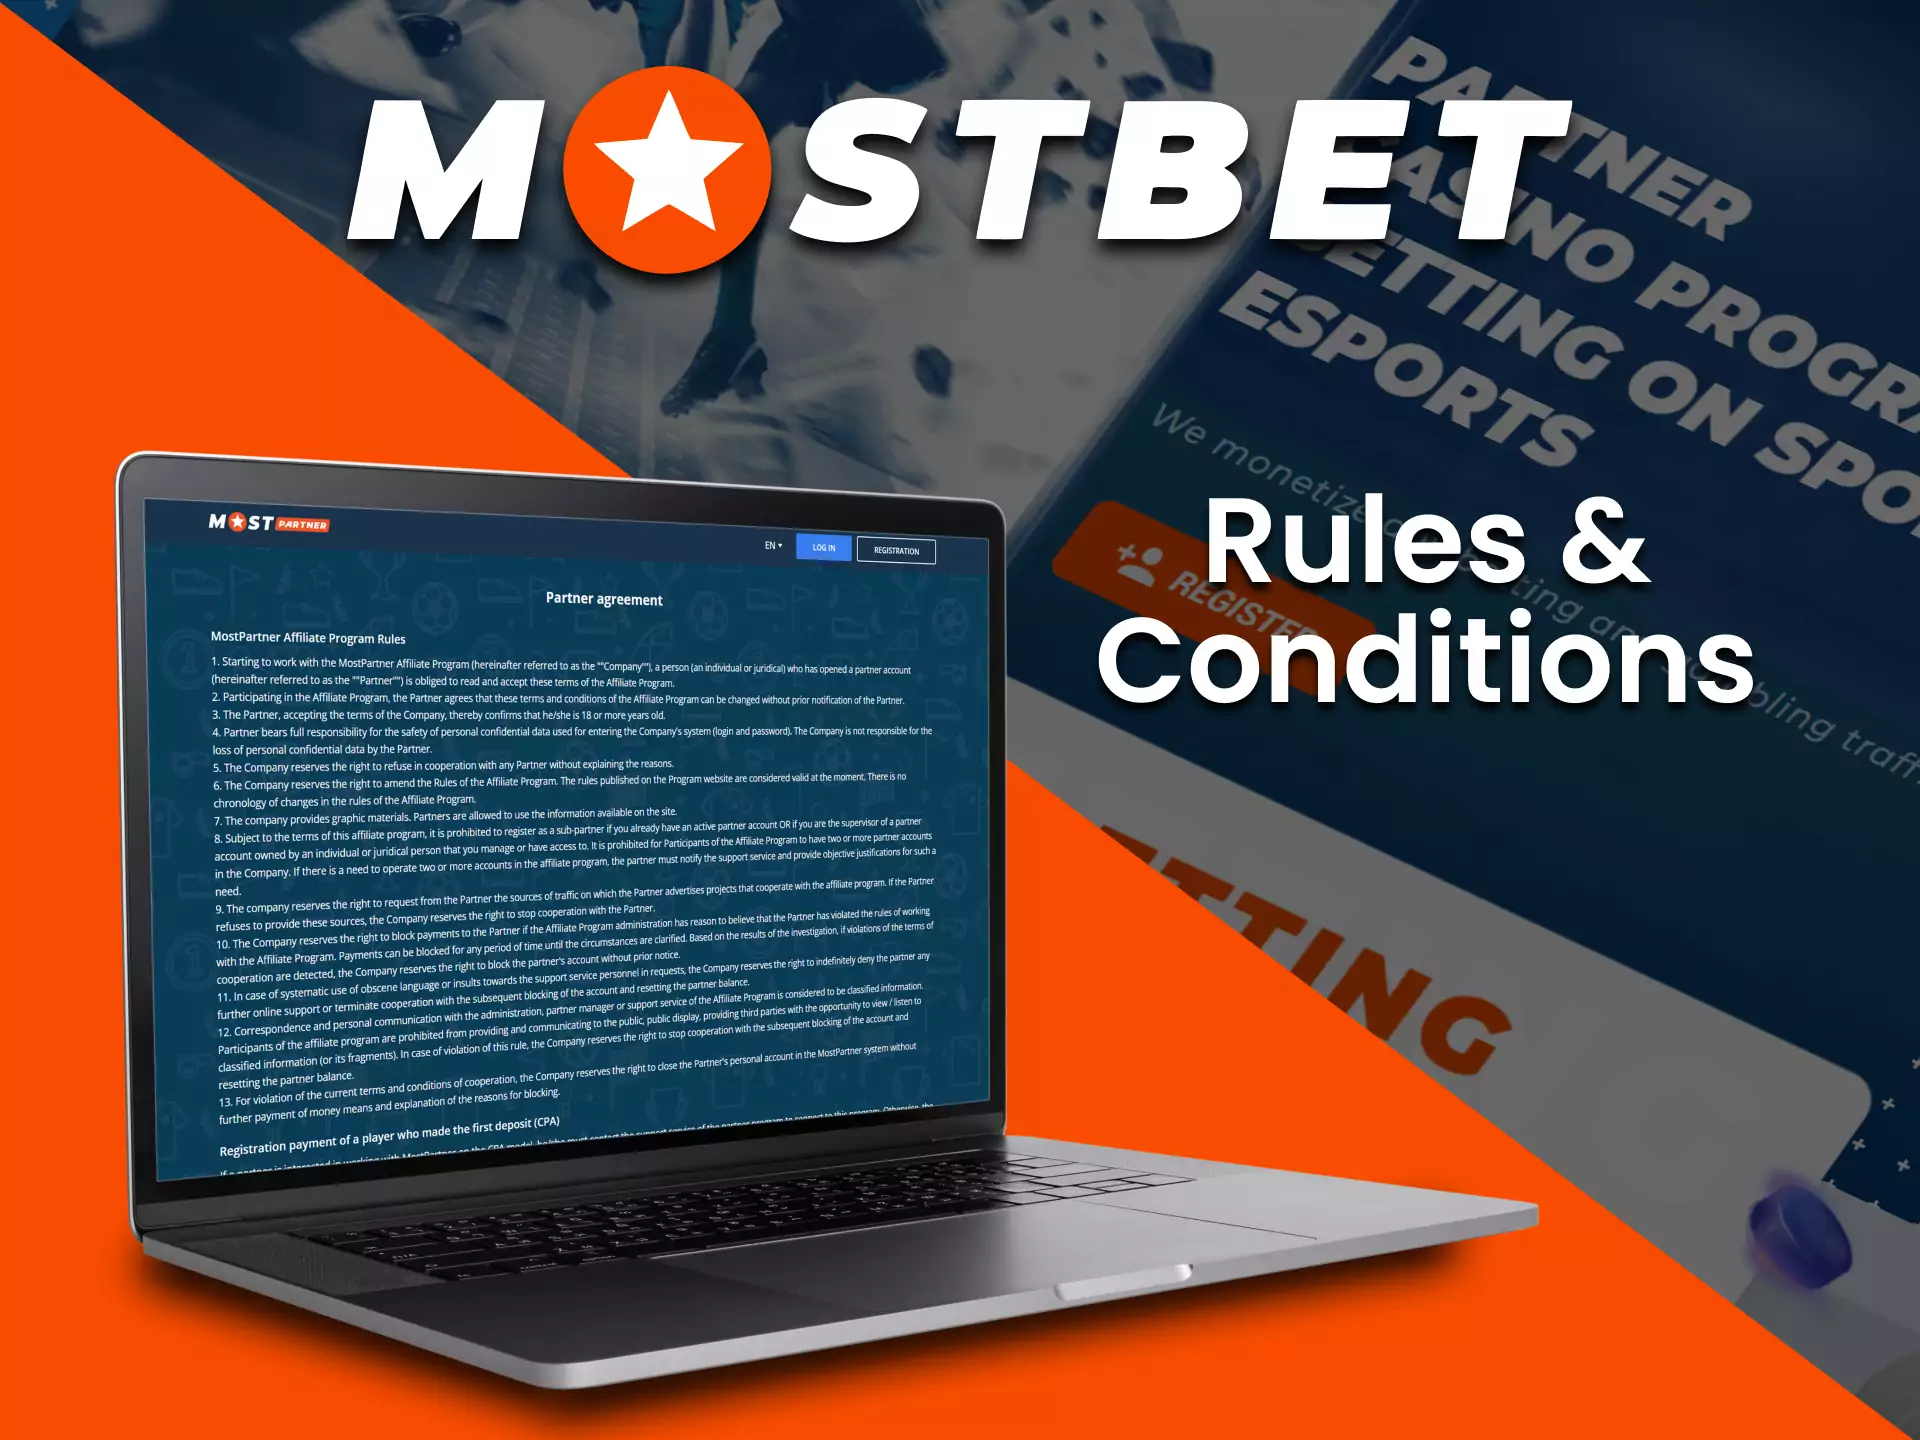 You can learn the rules of the program on the Mostbet Affiliate website.